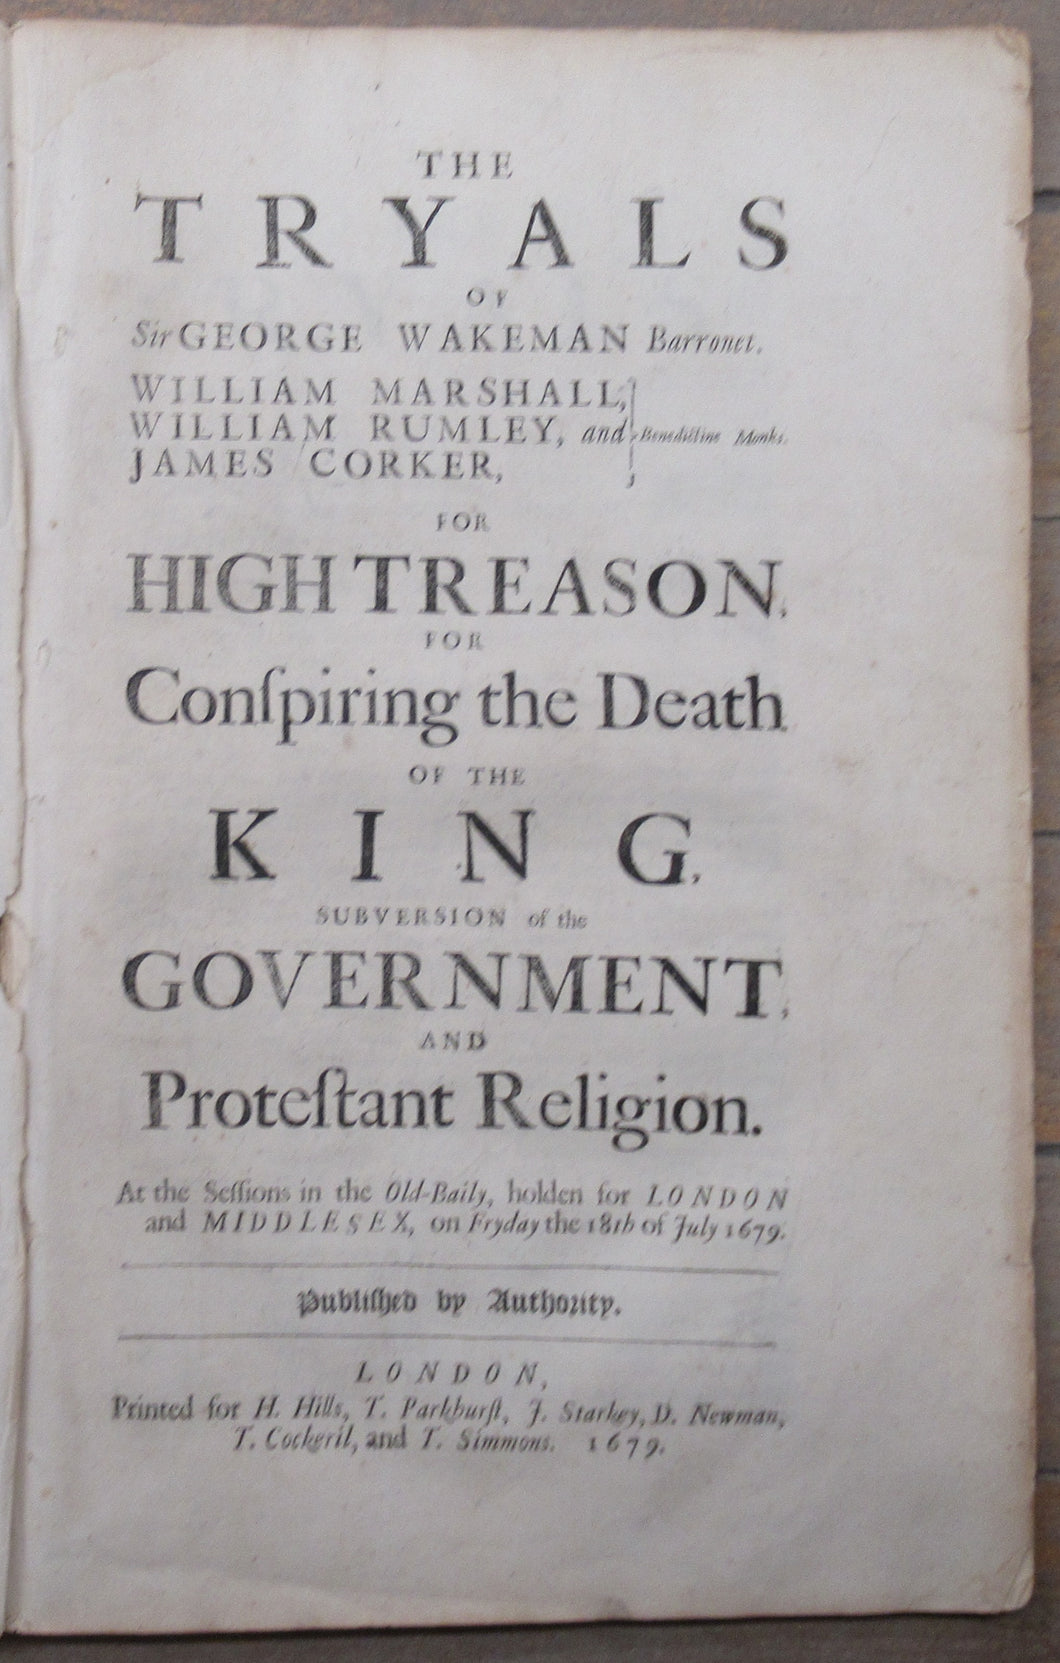 The Tryals of Sir George Wakeman Barronet. William Marshall, William Rumley, and James Corker, Benedictine Monks. For High Treason for Conspiring the Death of the King, Subversion of the Government, and Protestant Religion